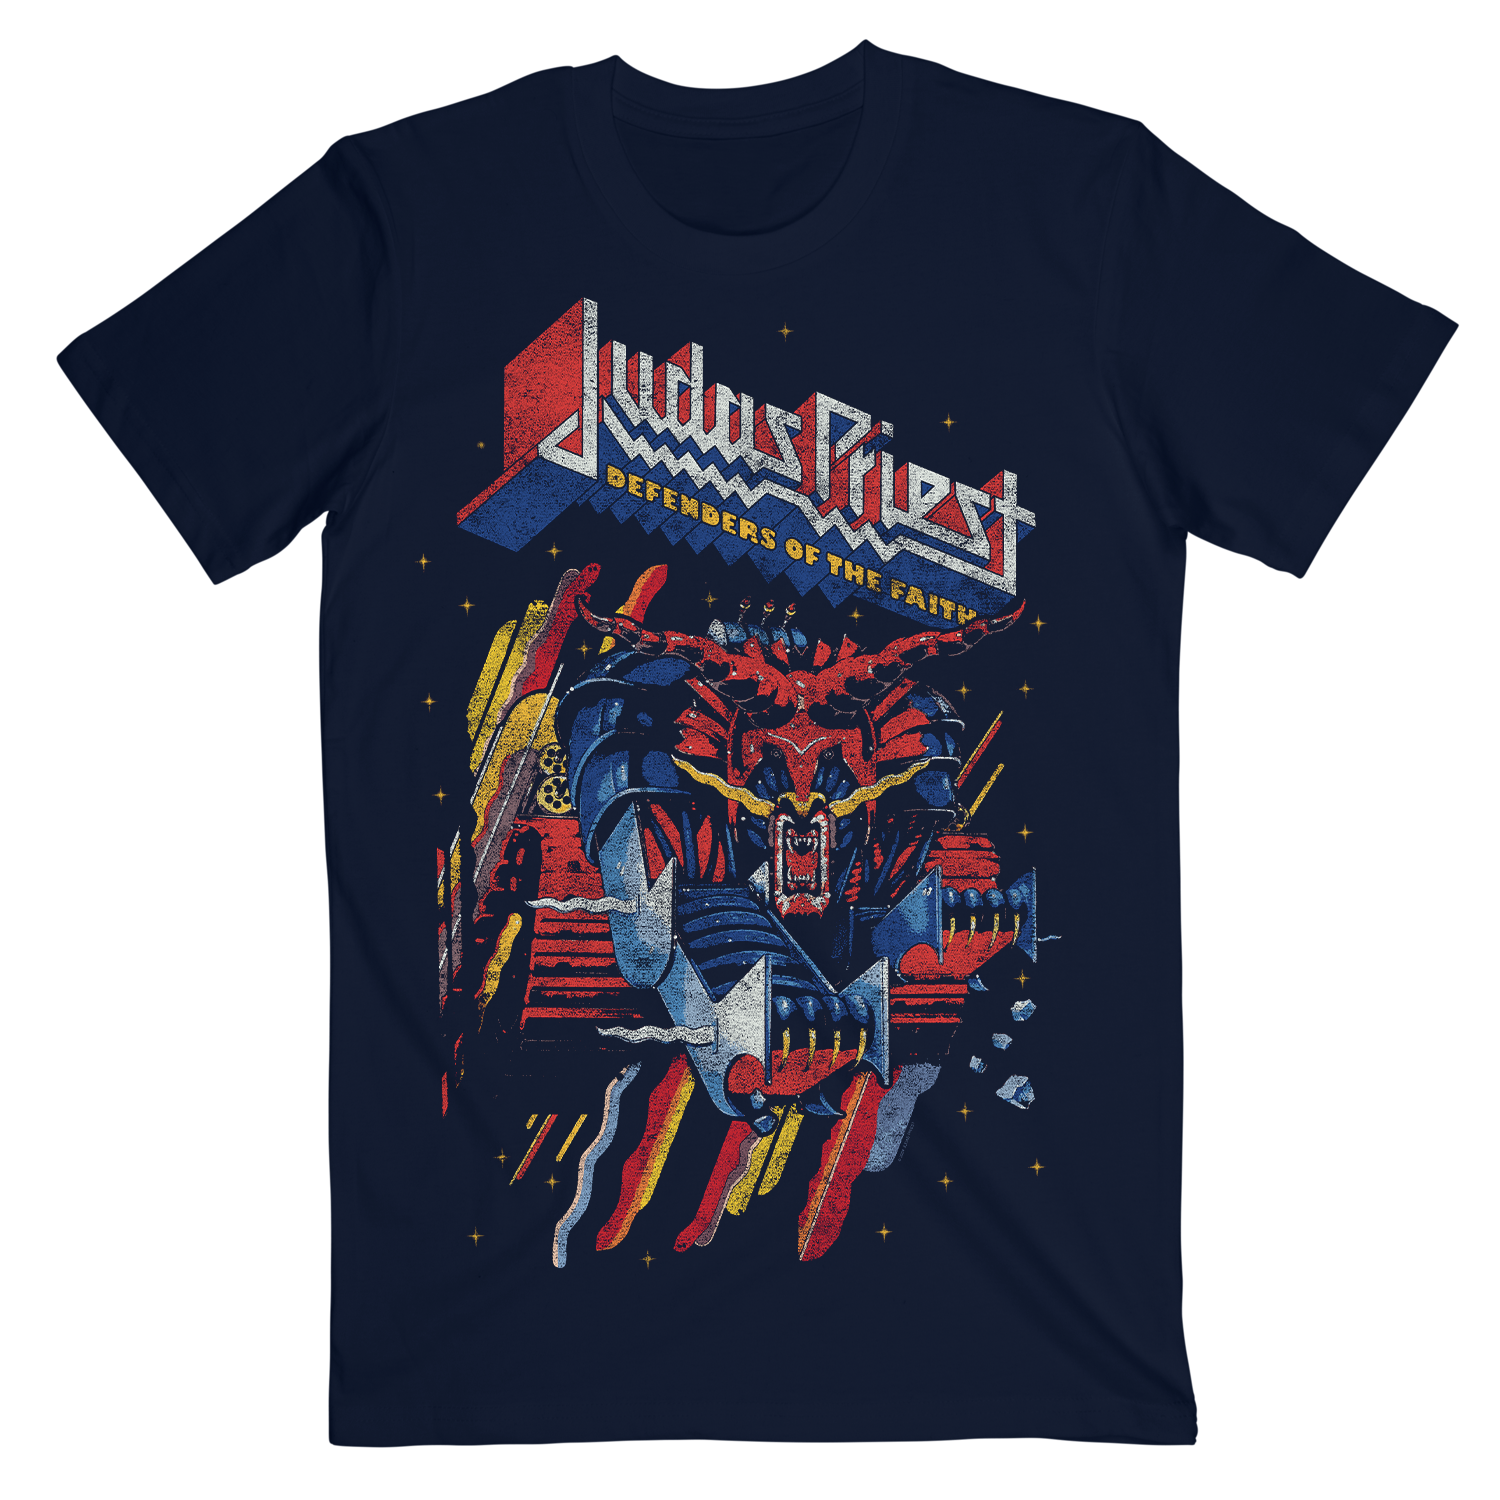 Collections – Judas Priest Store